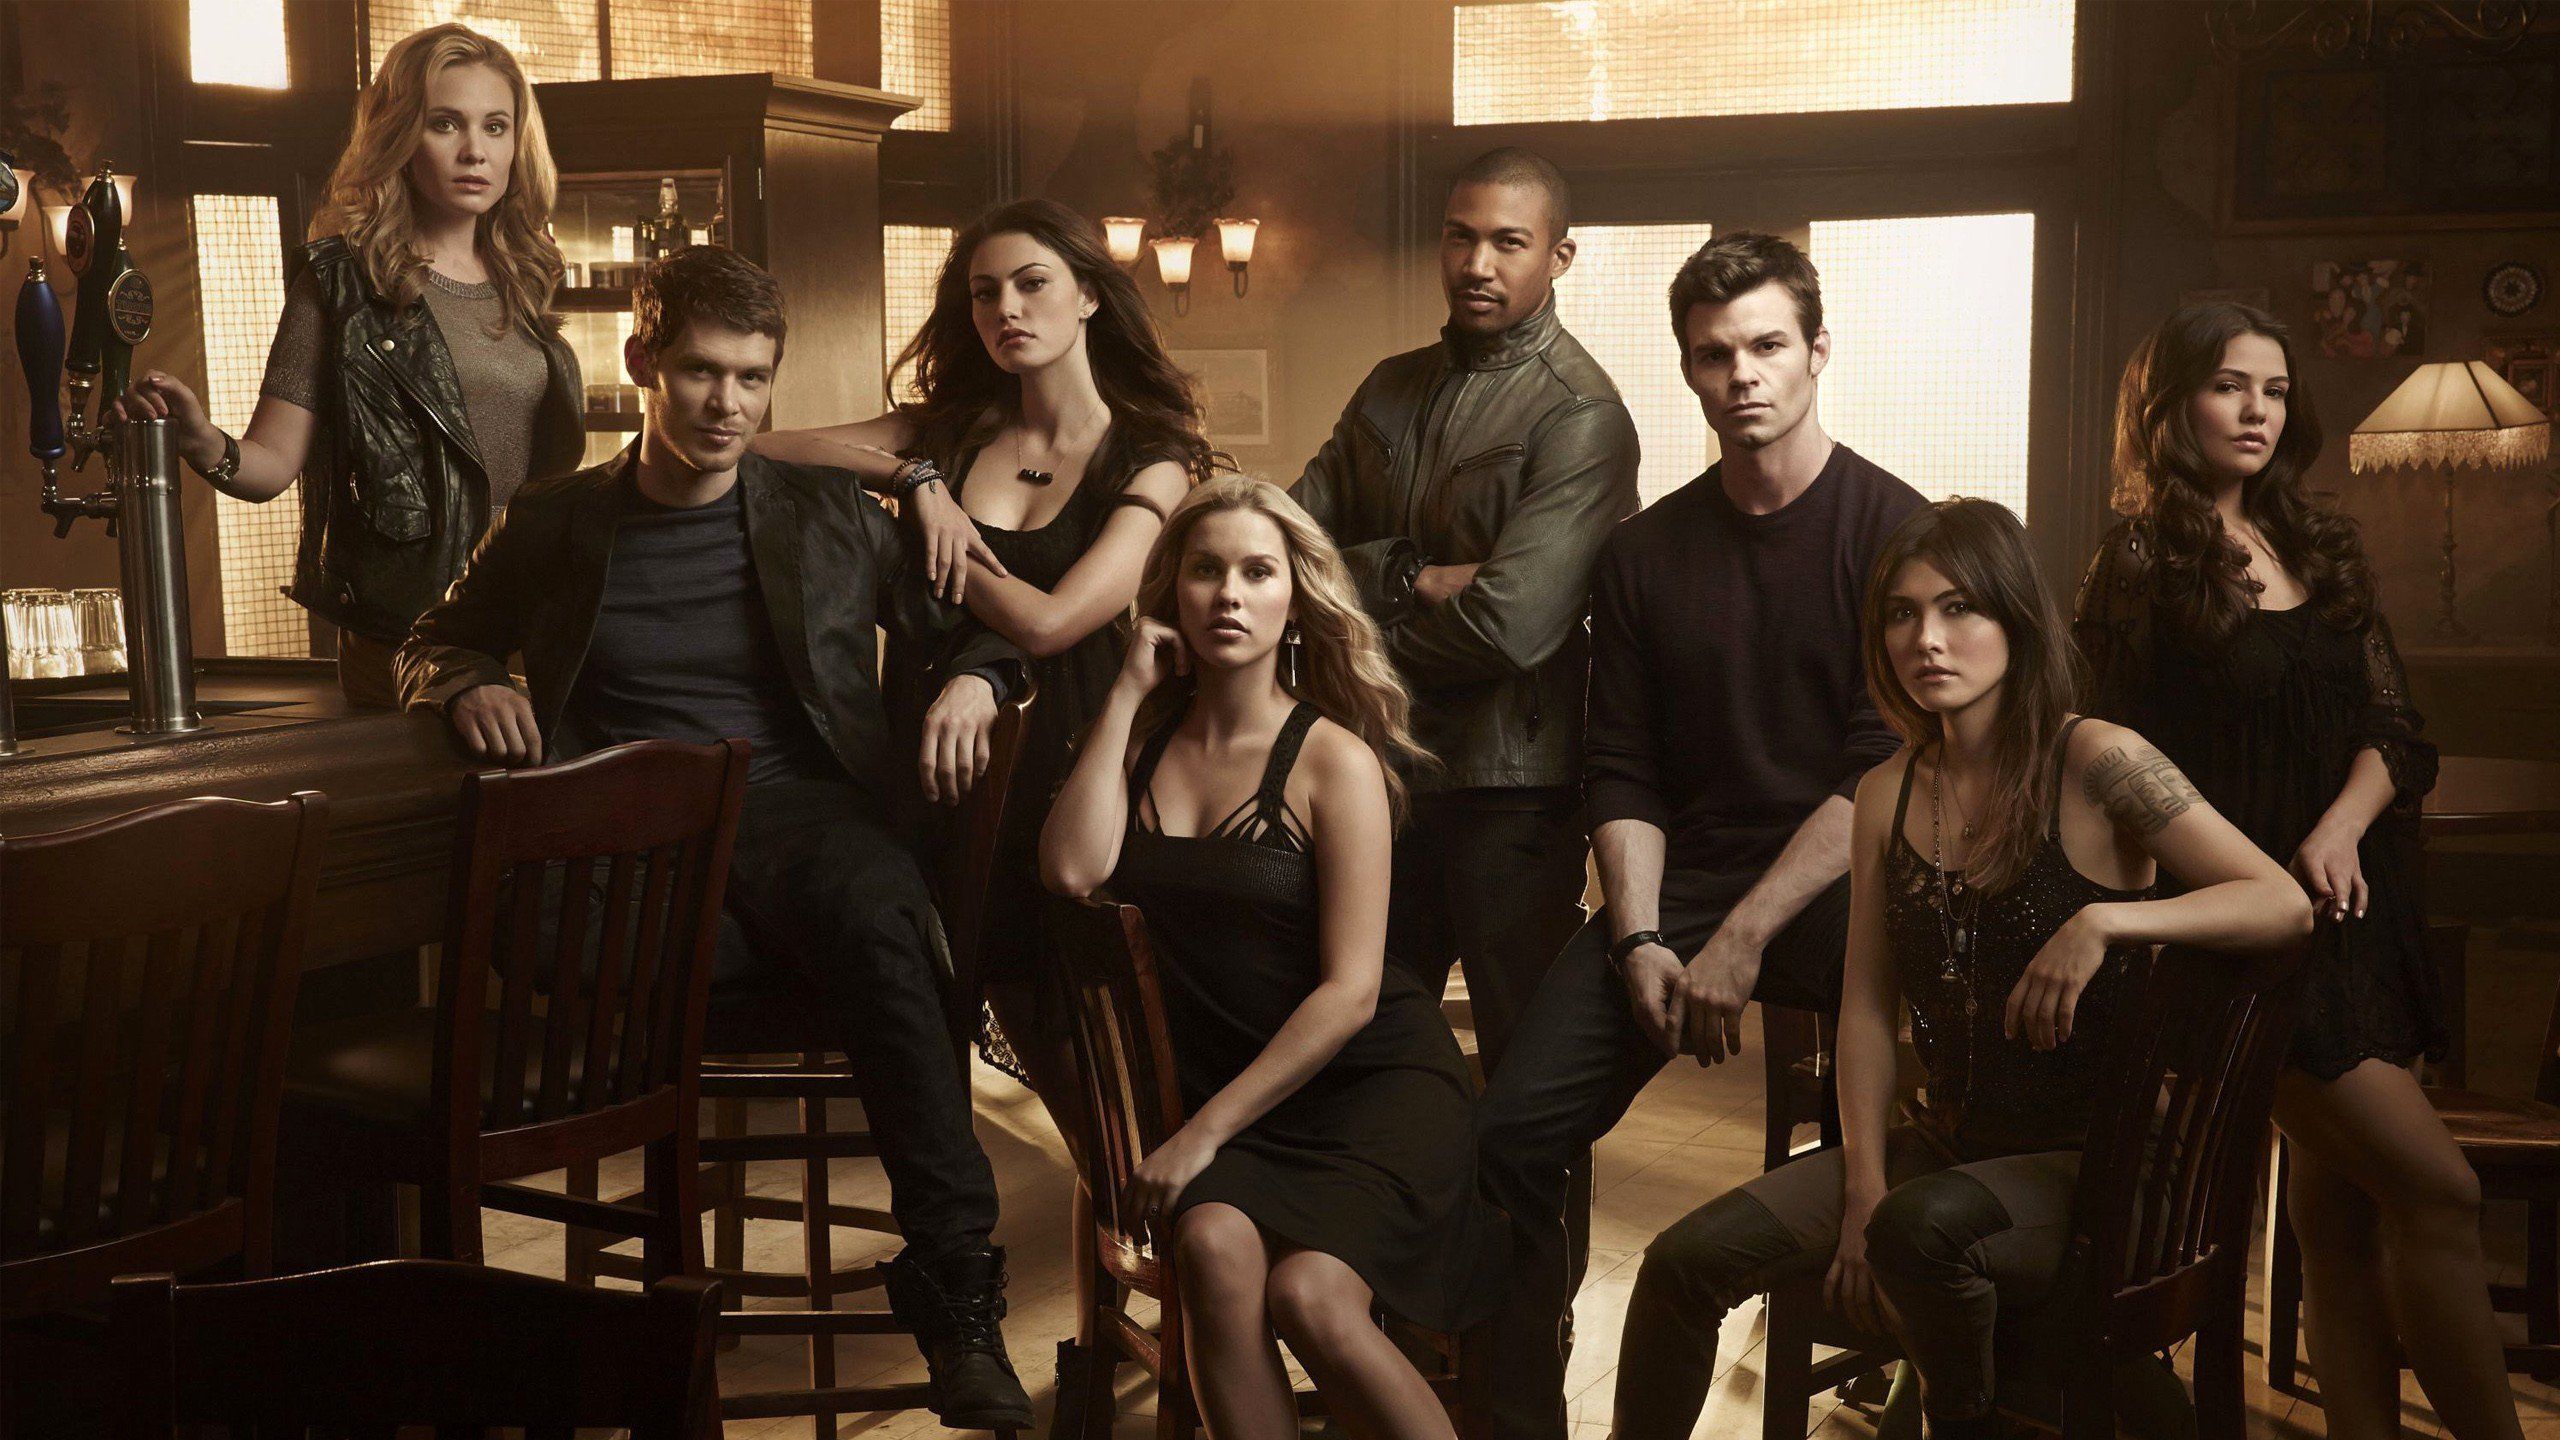 The Originals Season 3 1366x768 Resolution HD 4k Wallpaper, Image, Background, Photo and Picture